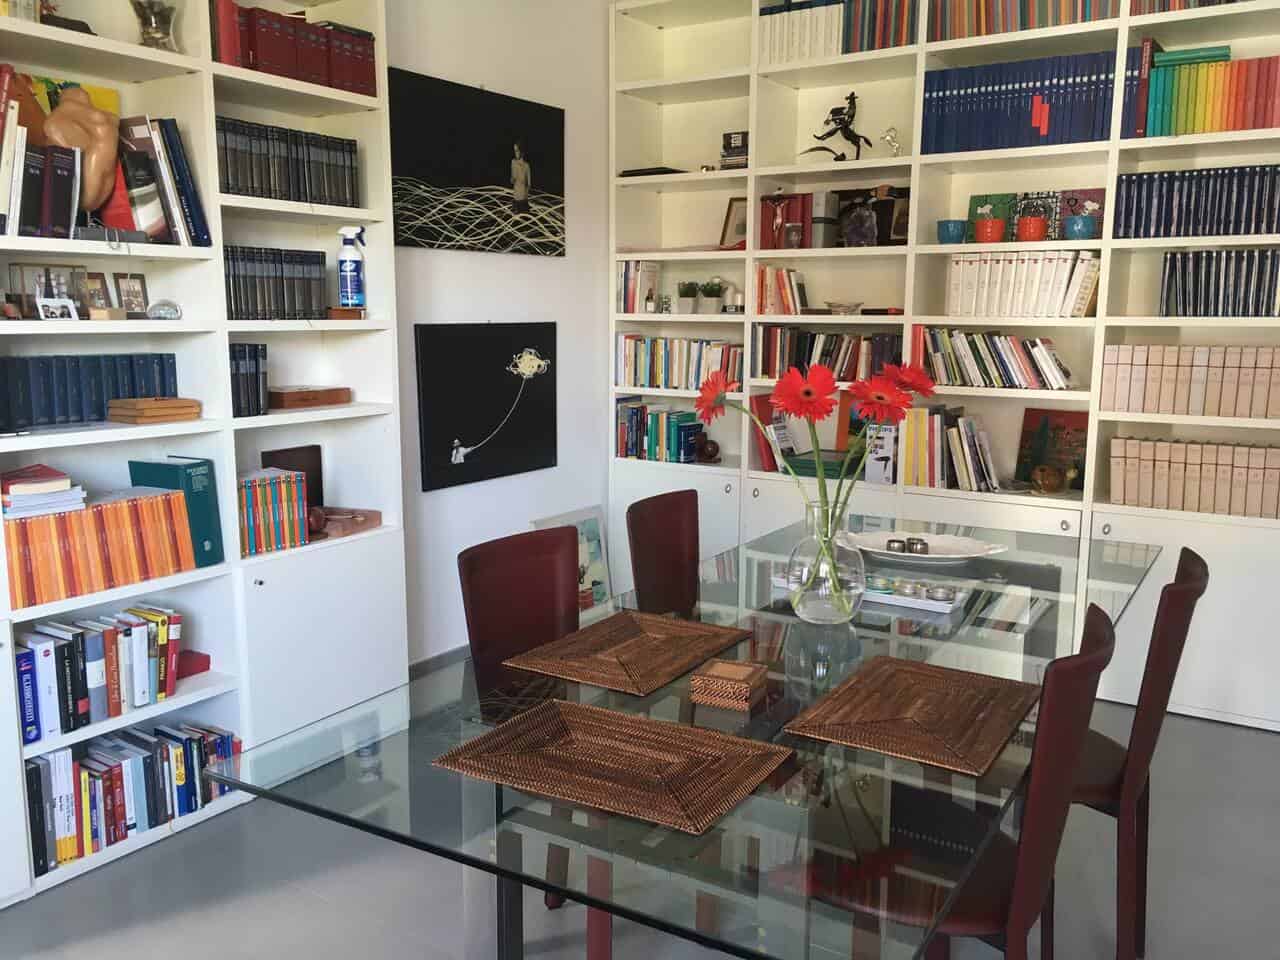 Image of Airbnb rental in Bologna, Italy